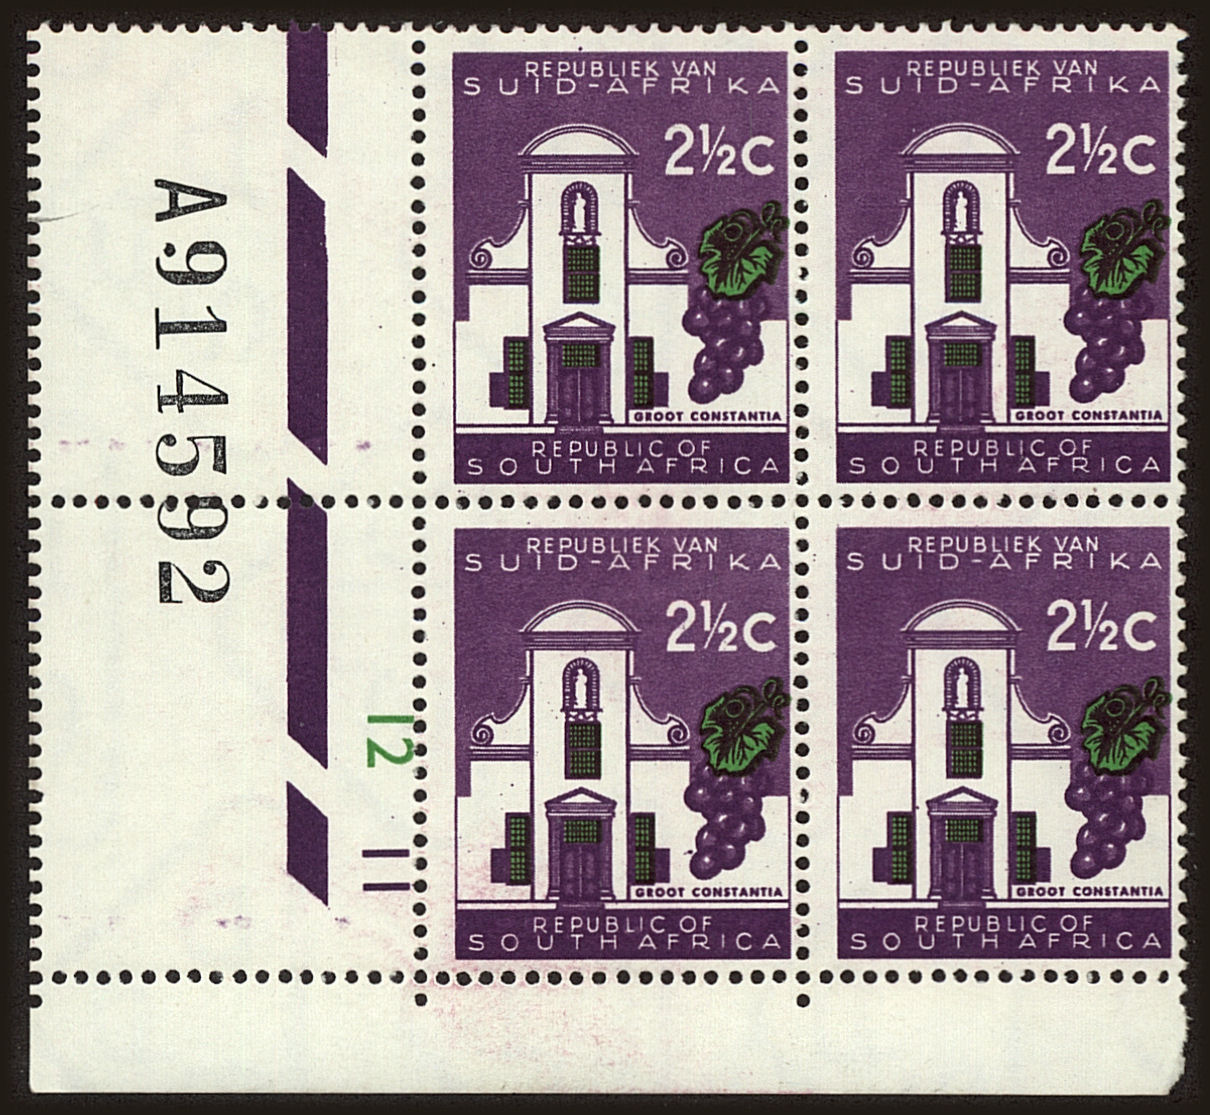 Front view of South Africa 258a collectors stamp